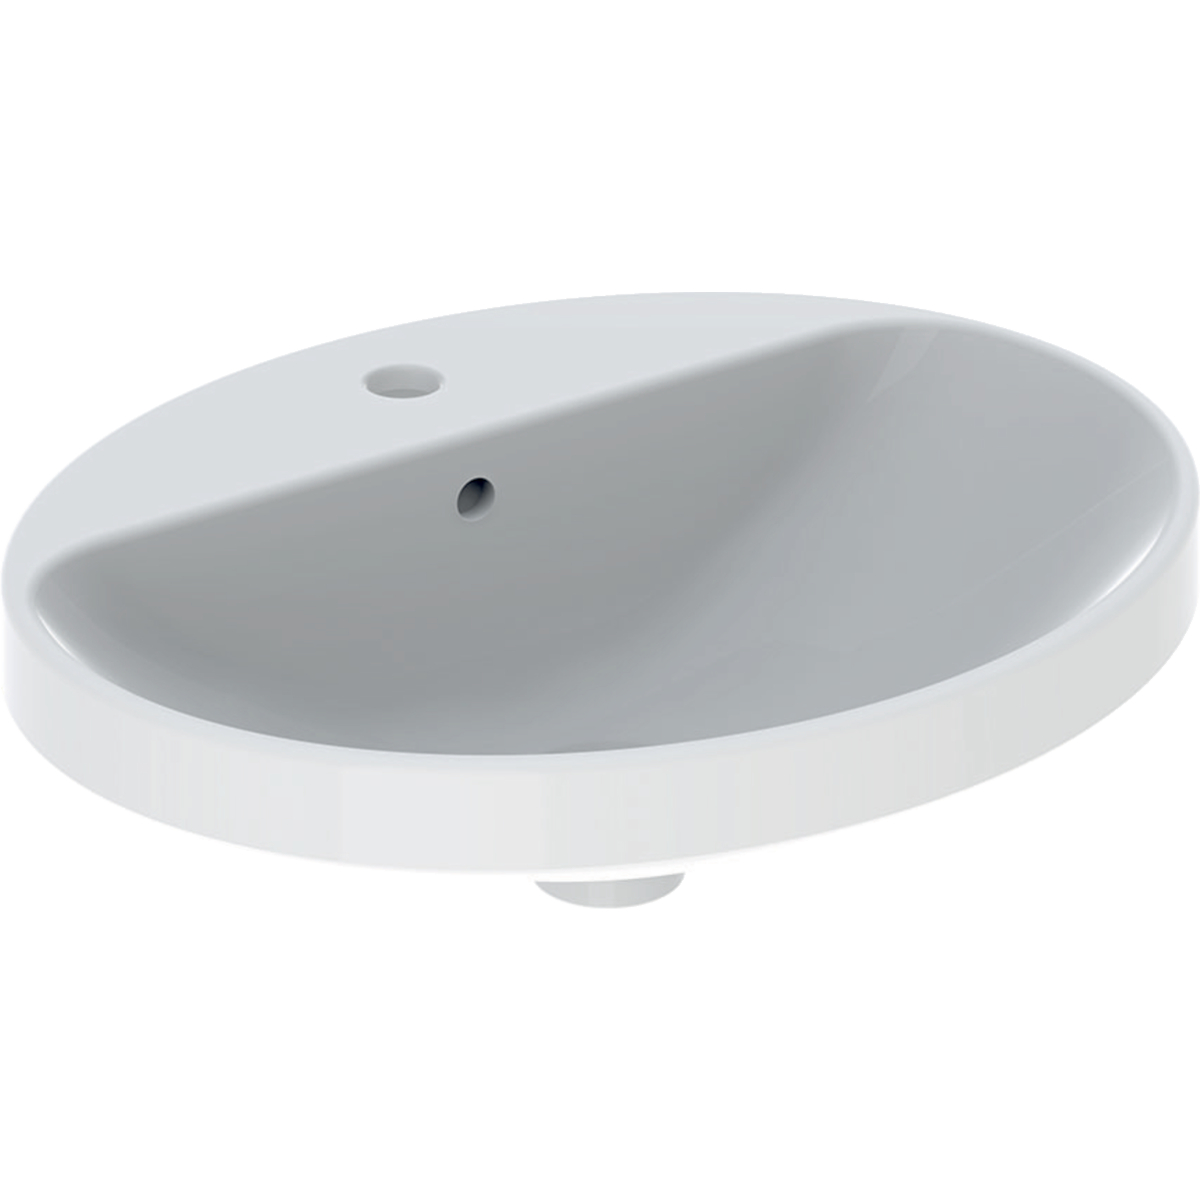 VariForm oval 55x45cm countertop 1th basin with overflow